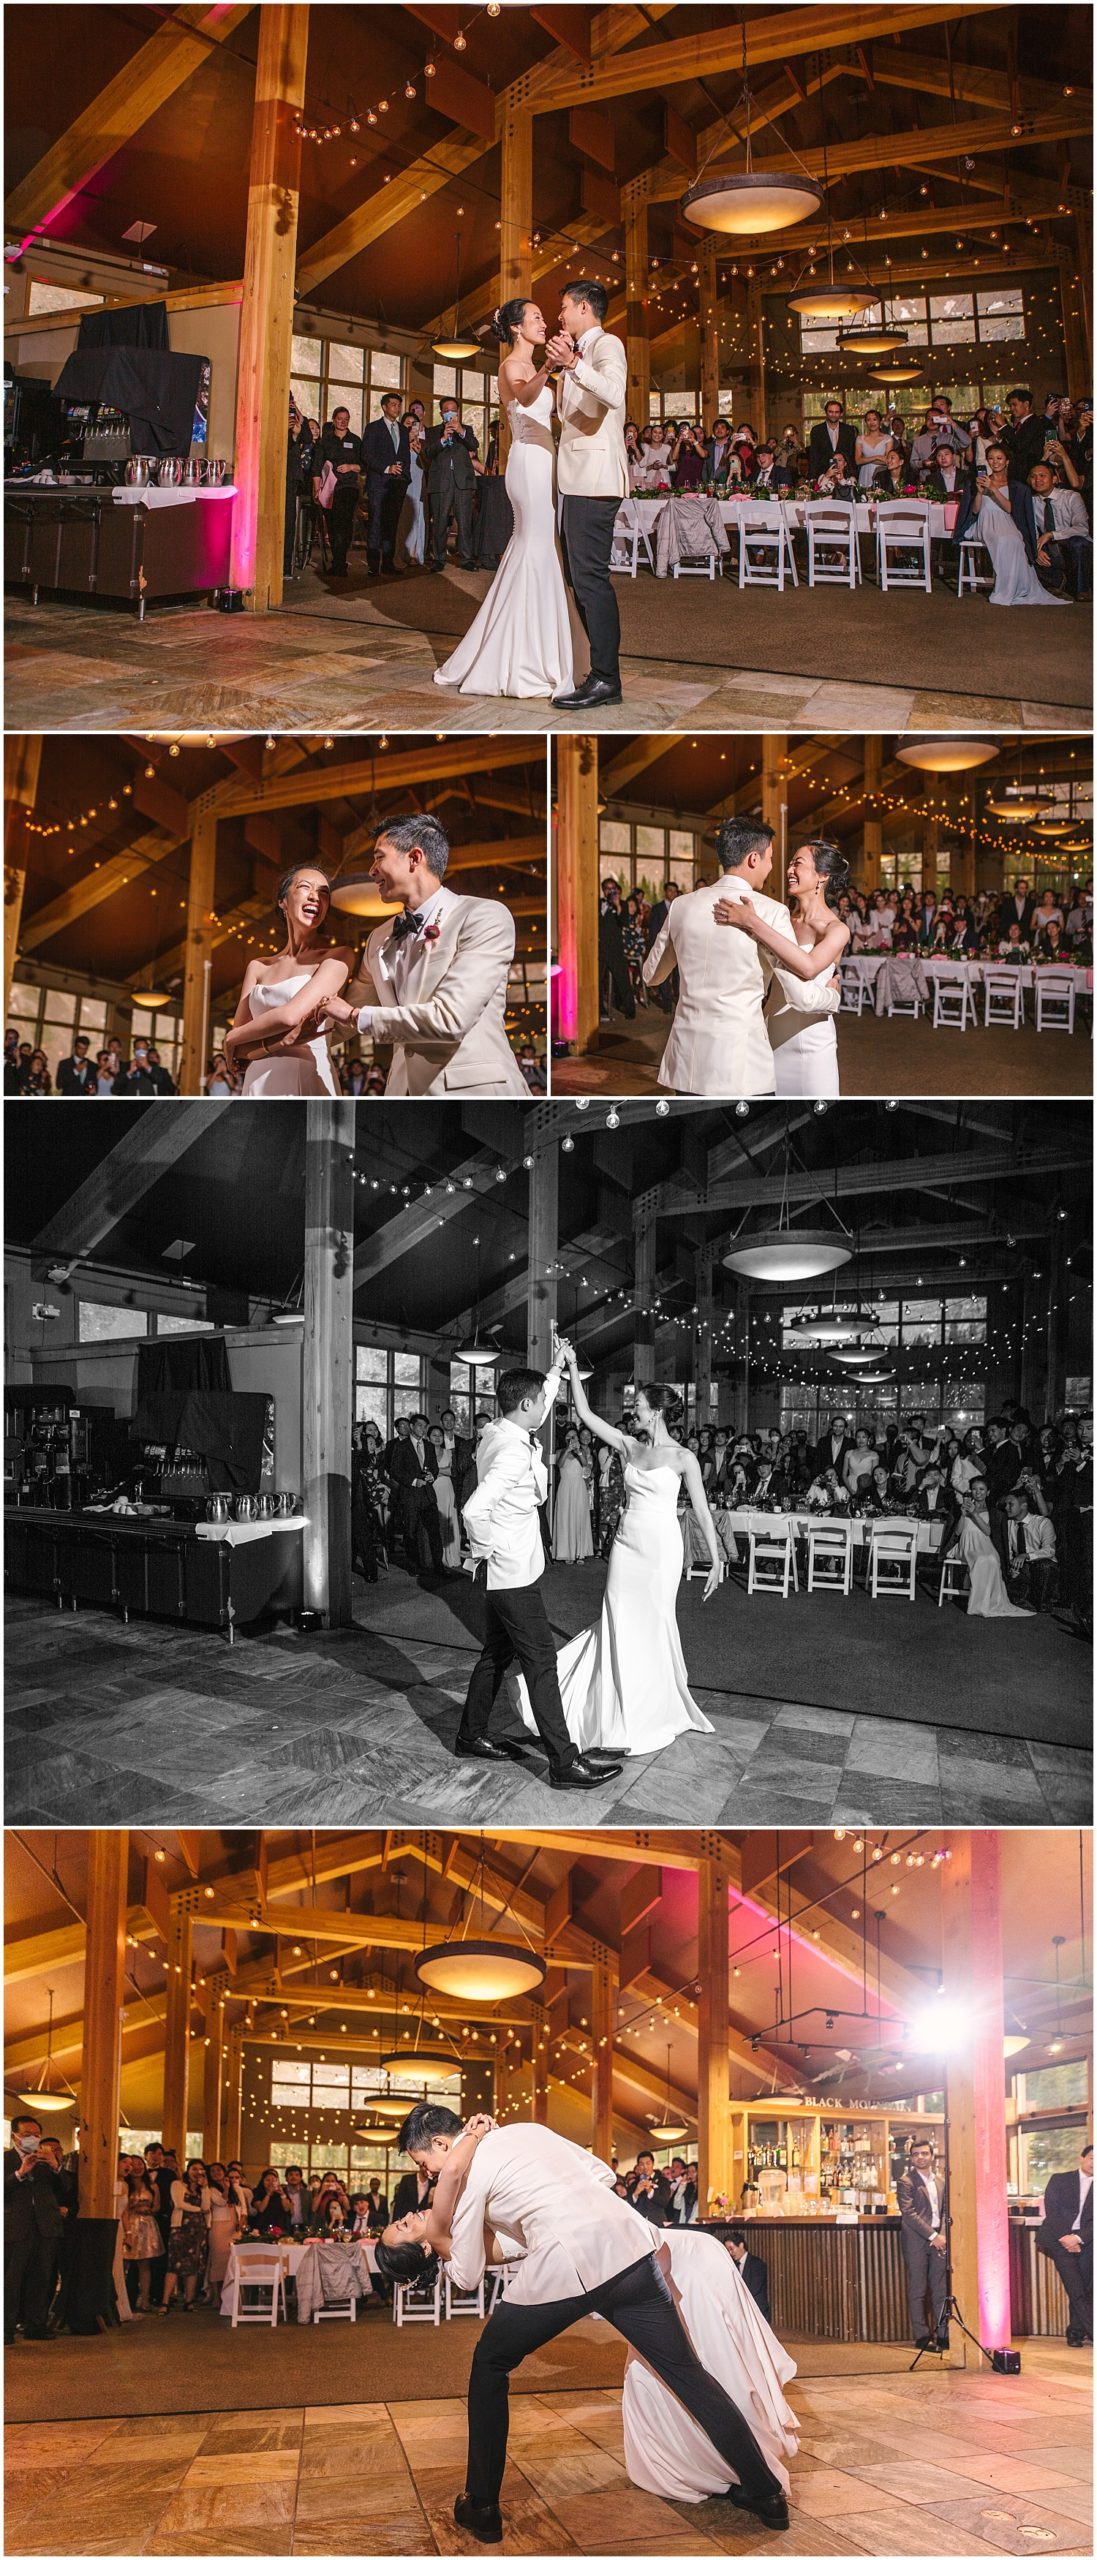 bride and groom first dance at Black Mountain Lodge wedding reception at Arapahoe Basin Colorado